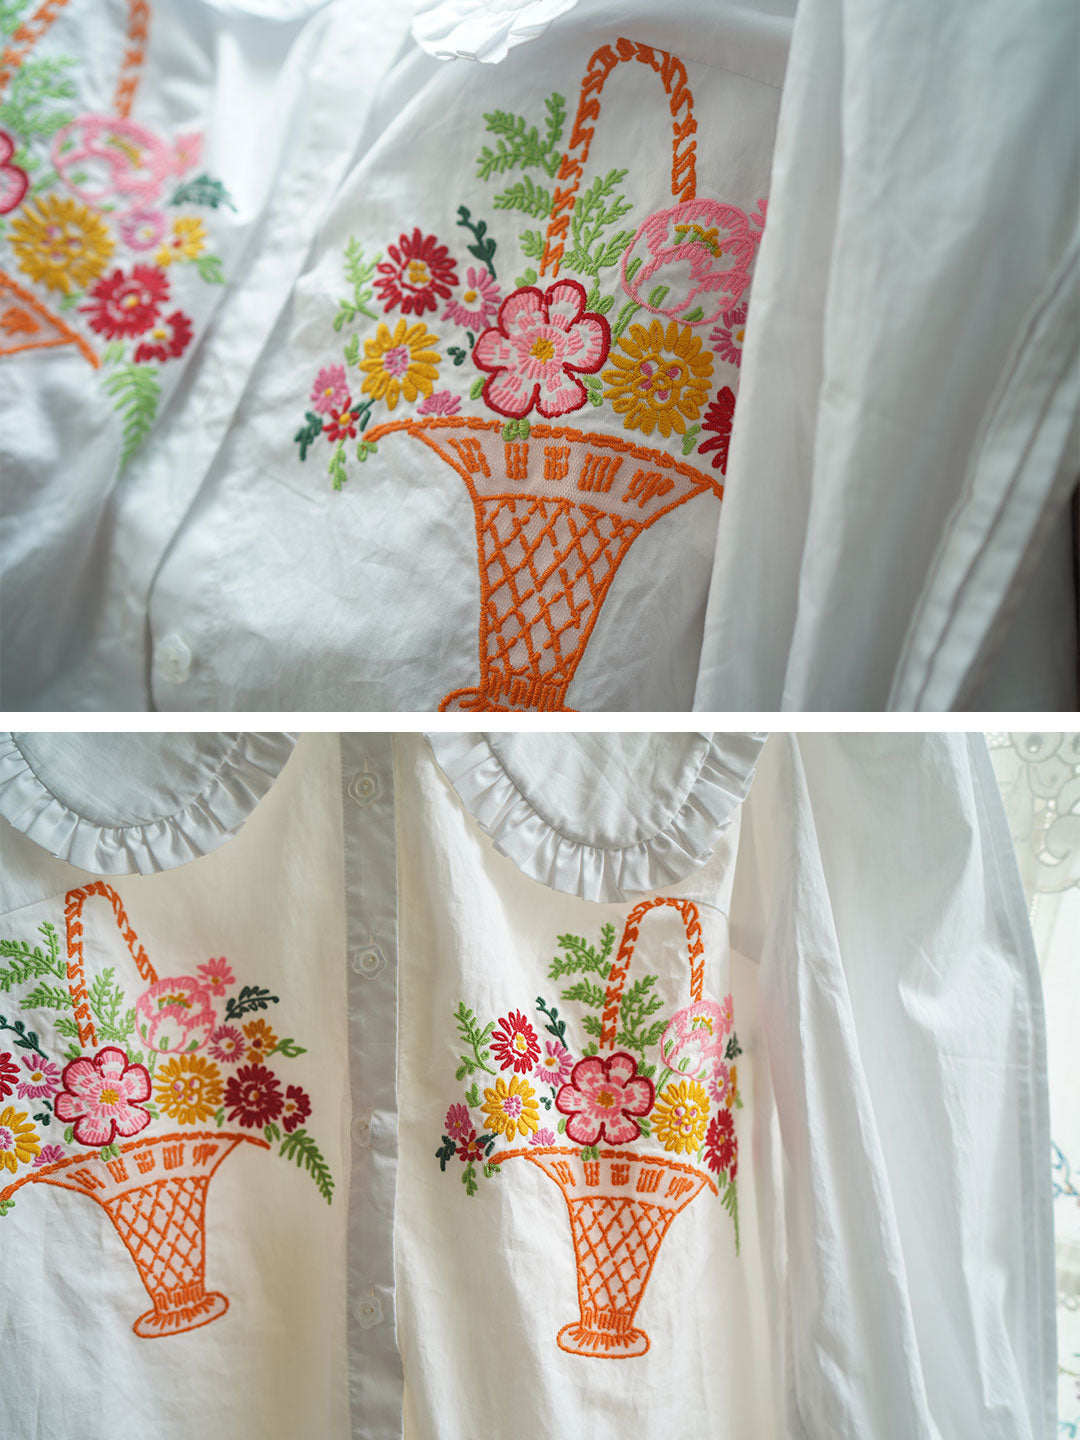 Unlogical Poem Embroidery Flower Blouse